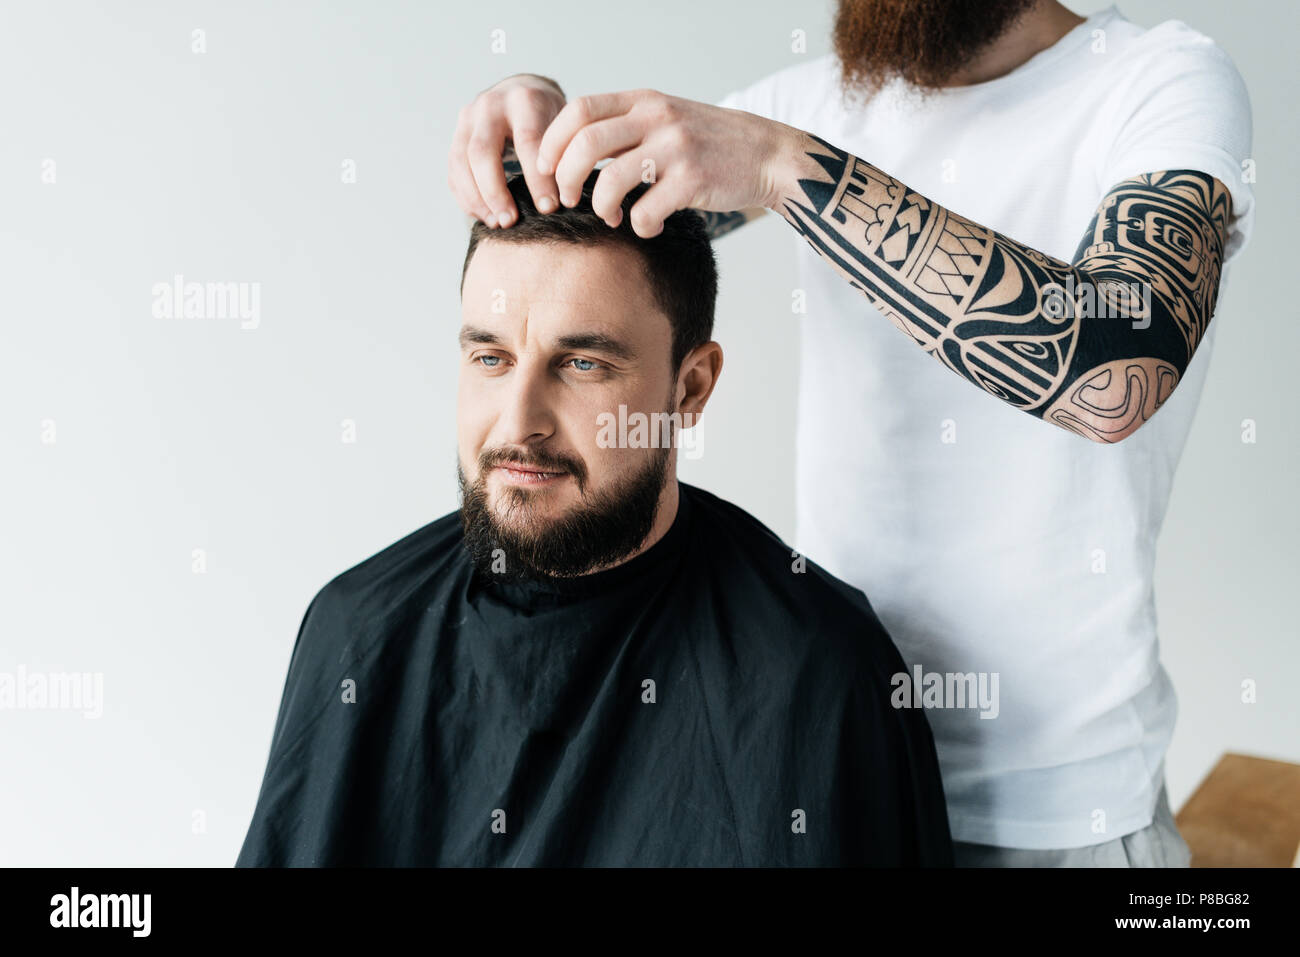 cropped image of barber styling customer hair at barbershop isolated on white Stock Photo